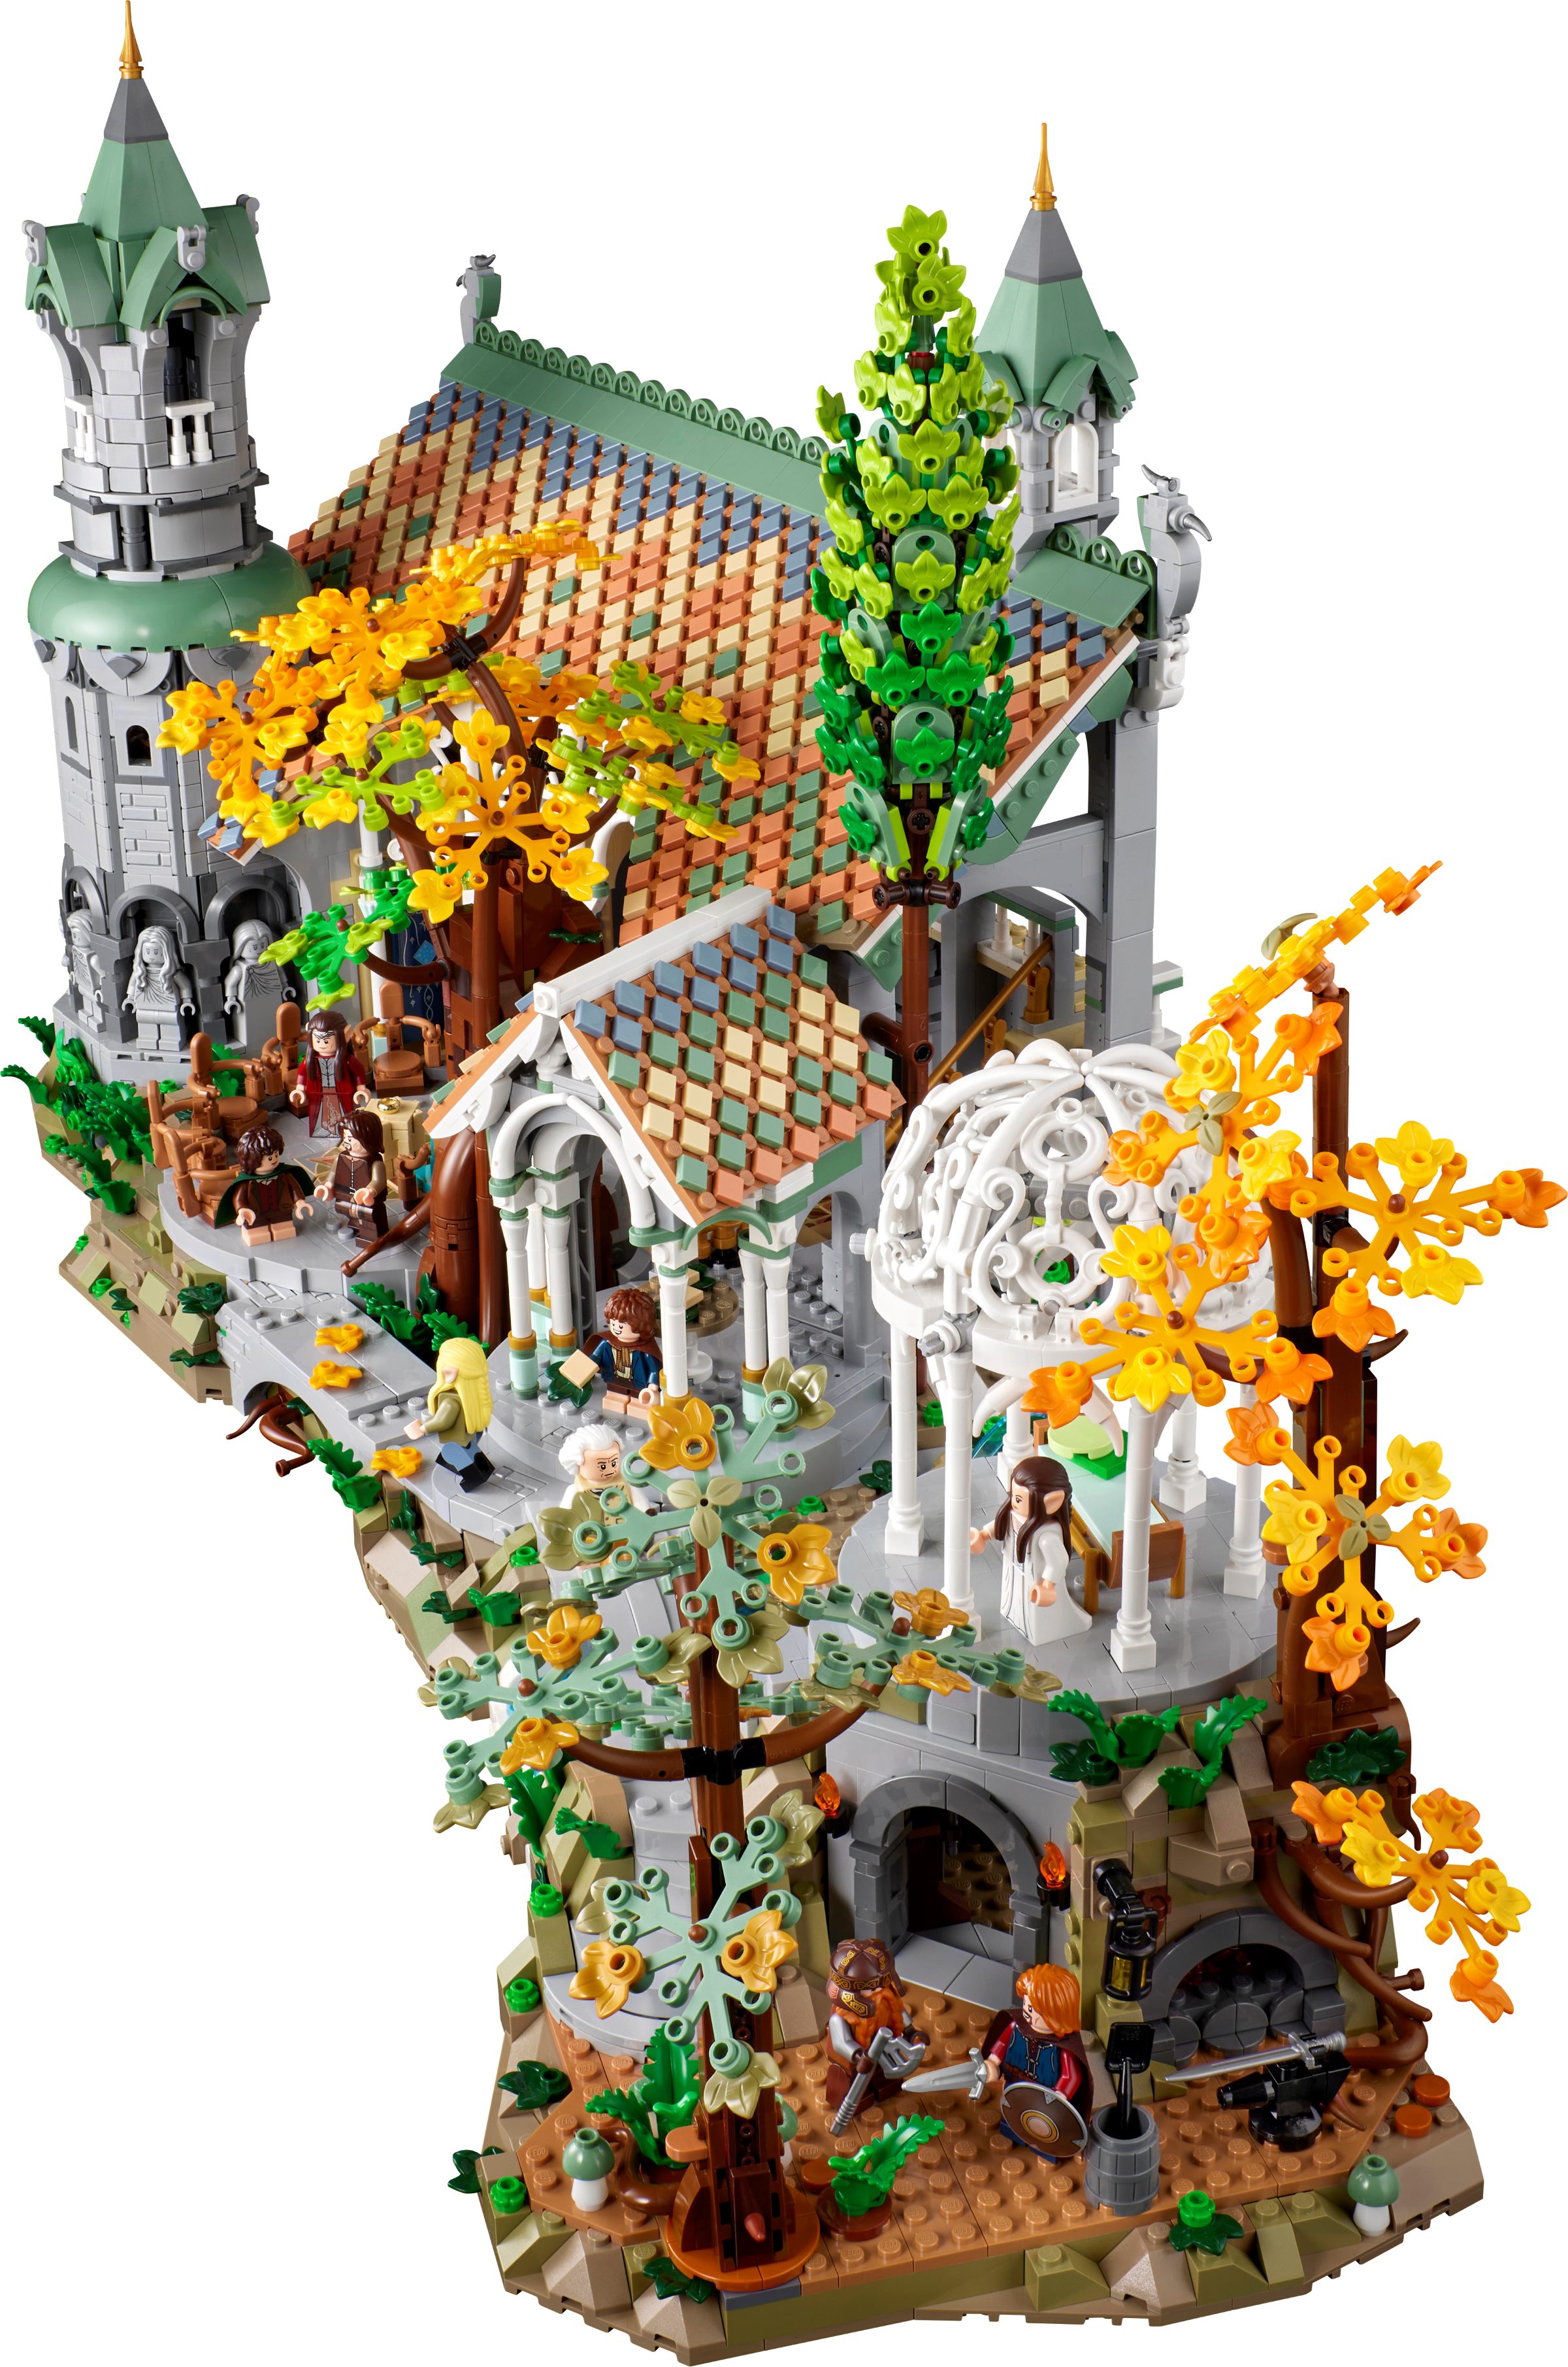 This 6,000 Piece Rivendell LEGO Set Takes You on a LORD OF THE RINGS  Adventure - Nerdist